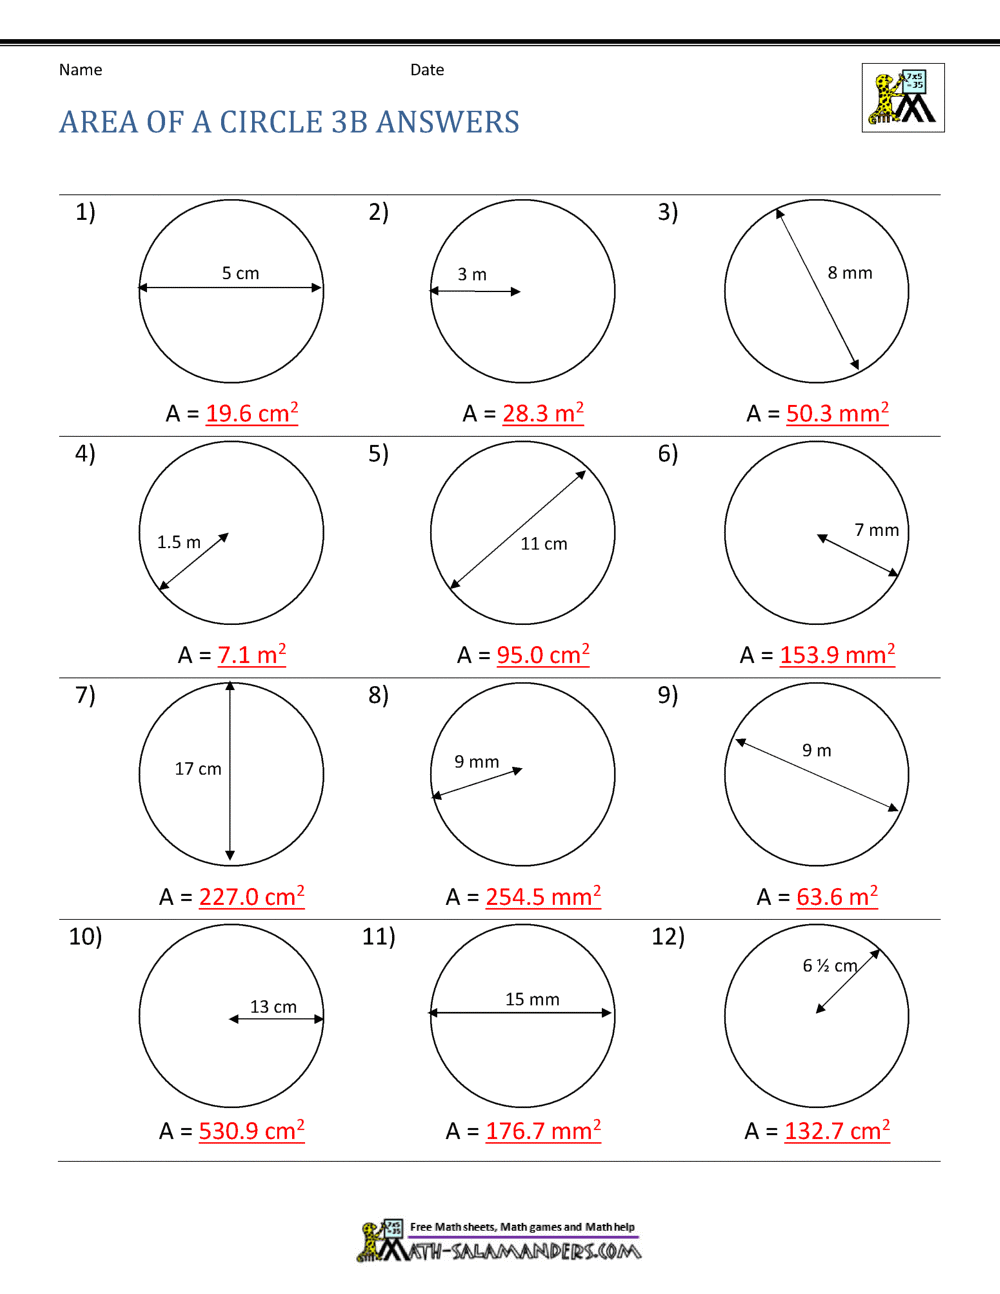 Area of a Circle For Parts Of A Circle Worksheet